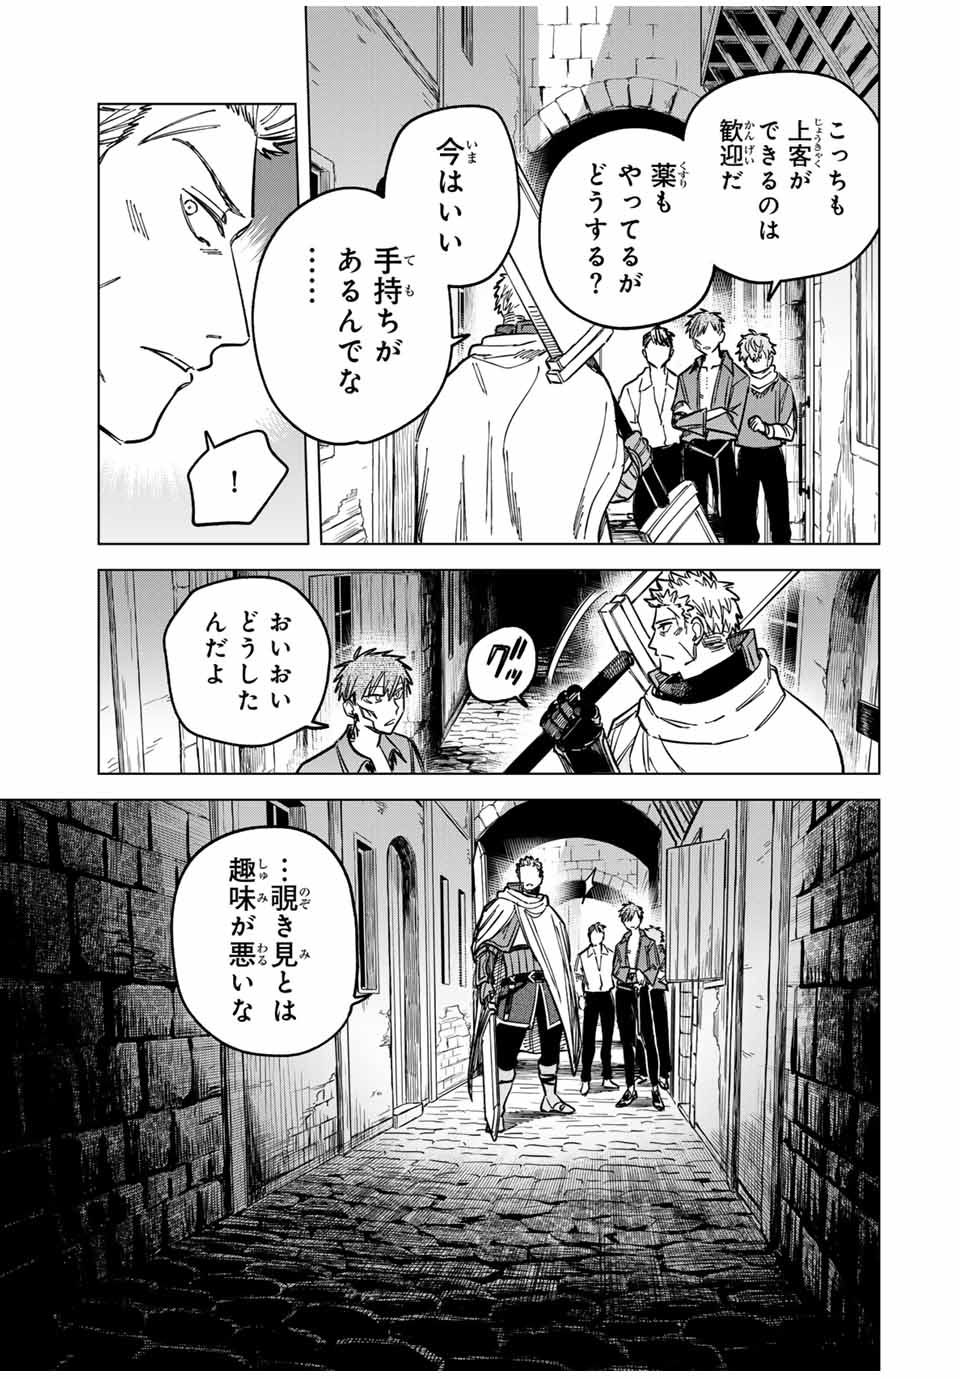 Witch and Mercenary 魔女と傭兵 第11話 - Page 11